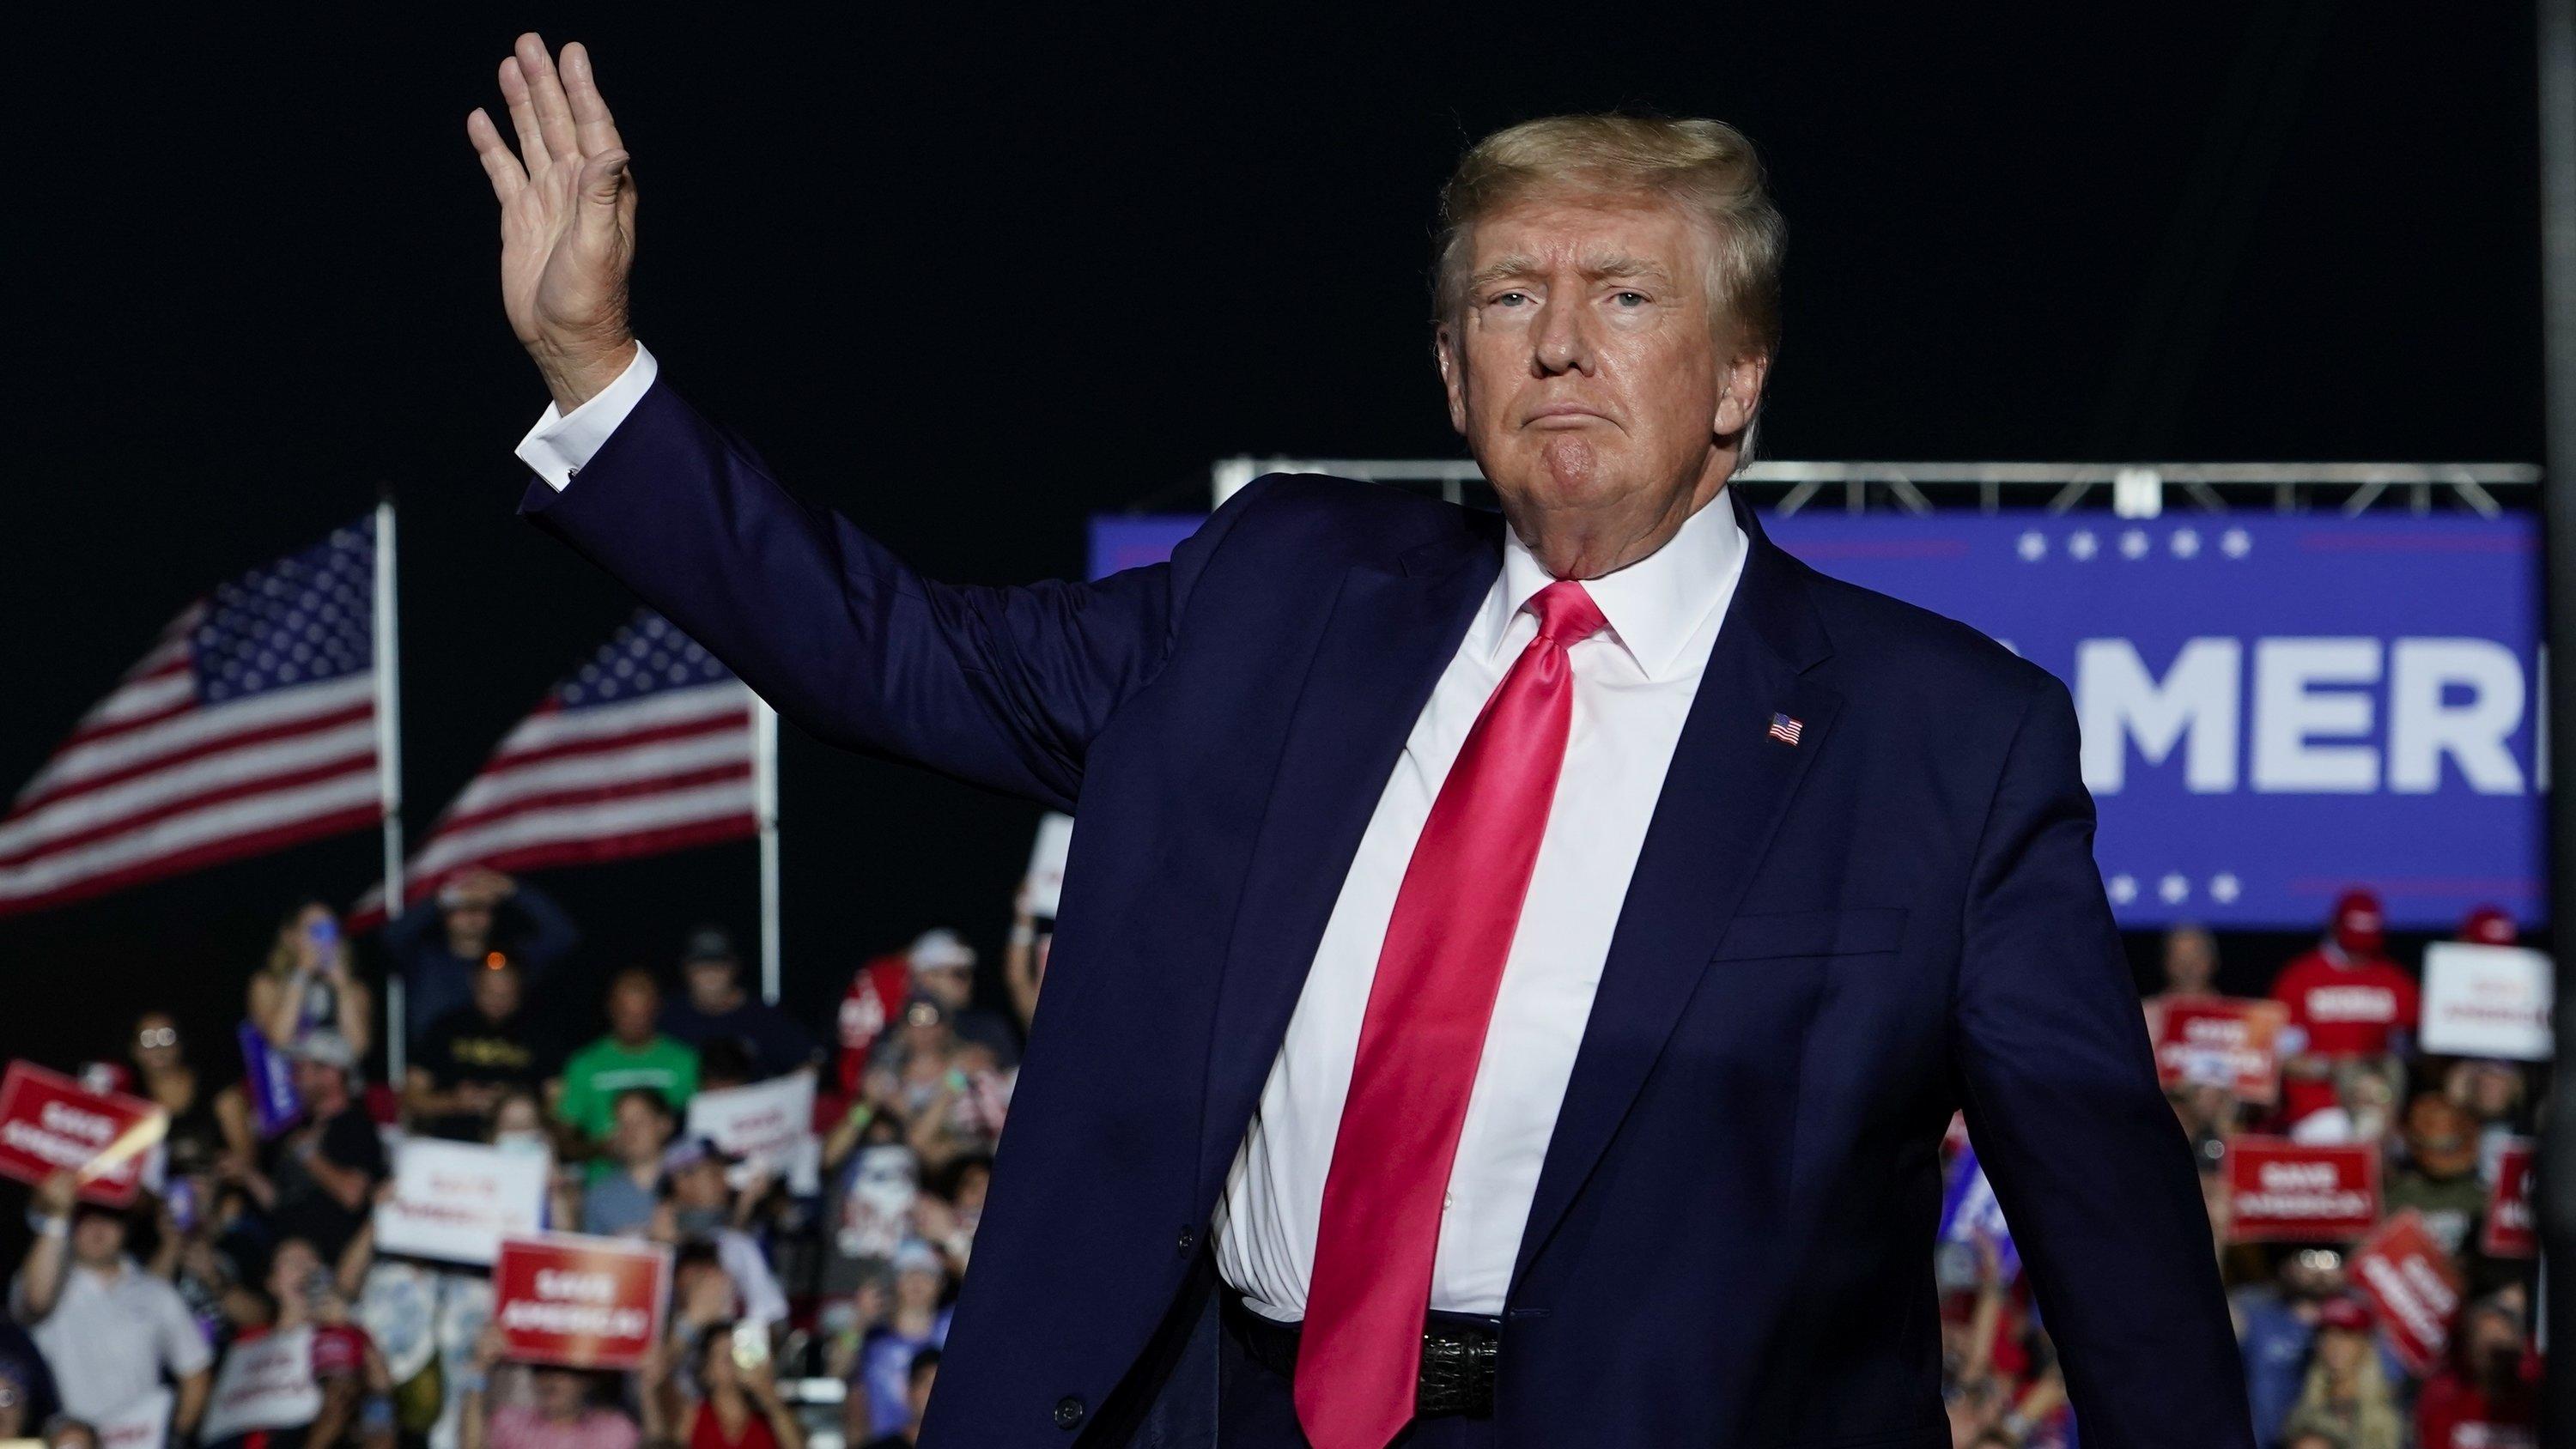 FILE - Former President Donald Trump arrives at a rally, Aug. 5, 2022, in Waukesha, Wis. Trump backed lots of Republicans who won primaries this year. Now comes the harder part, helping them win in November. Trump heads to Wilkes-Barre, Pennsylvania,